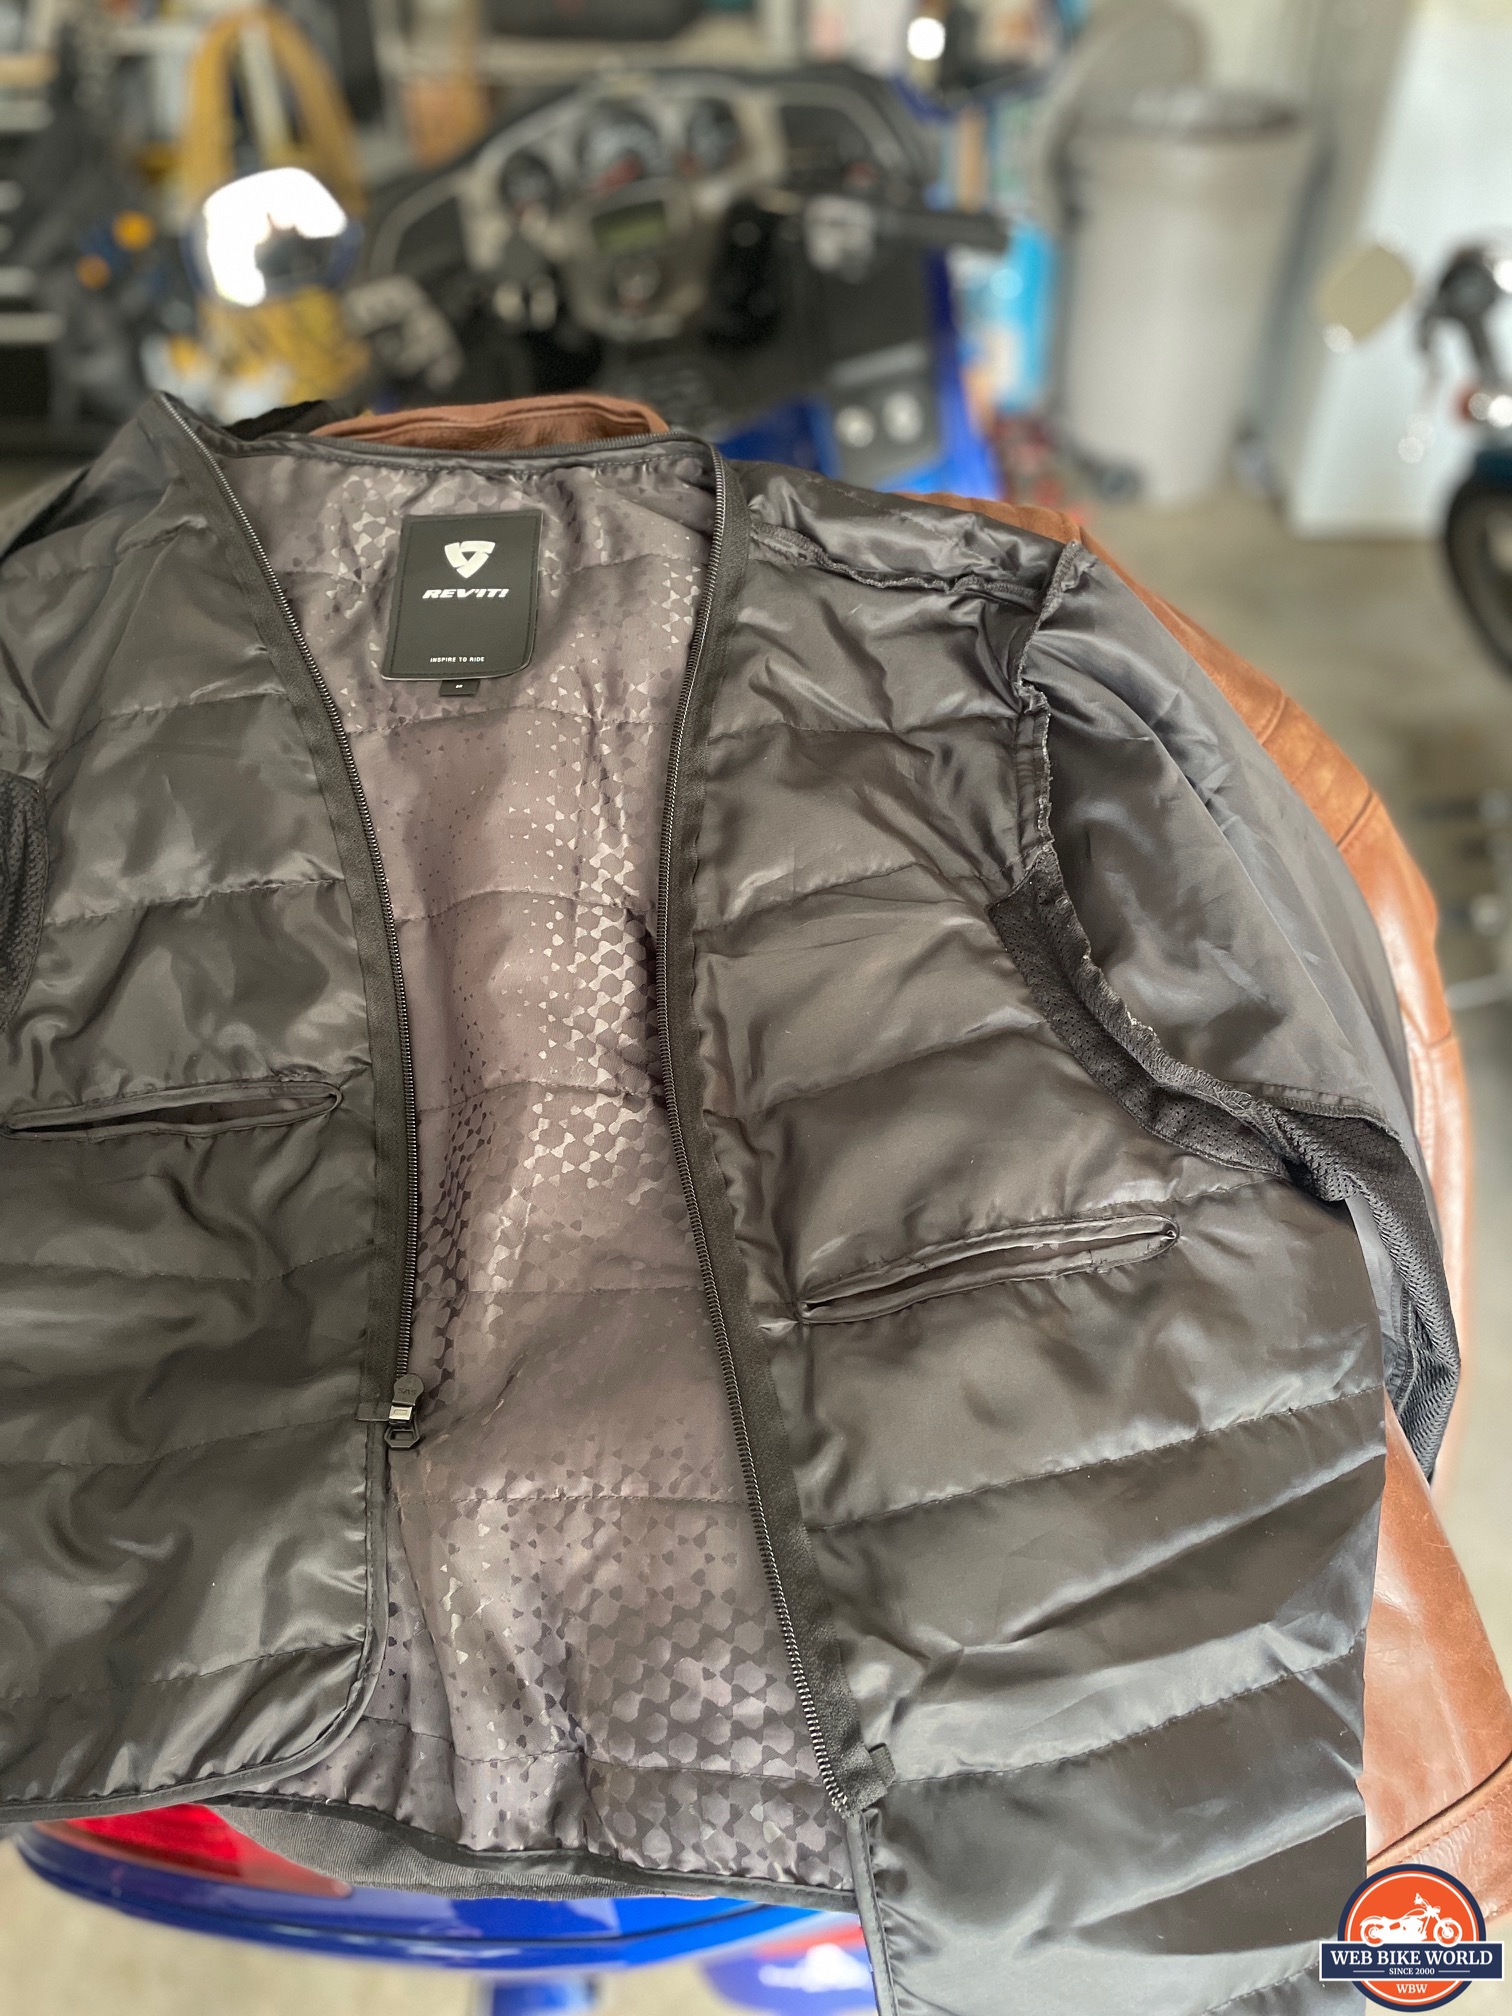 REV’IT Restless Leather Jacket: Hands-On Review | Honda NC700 Forum